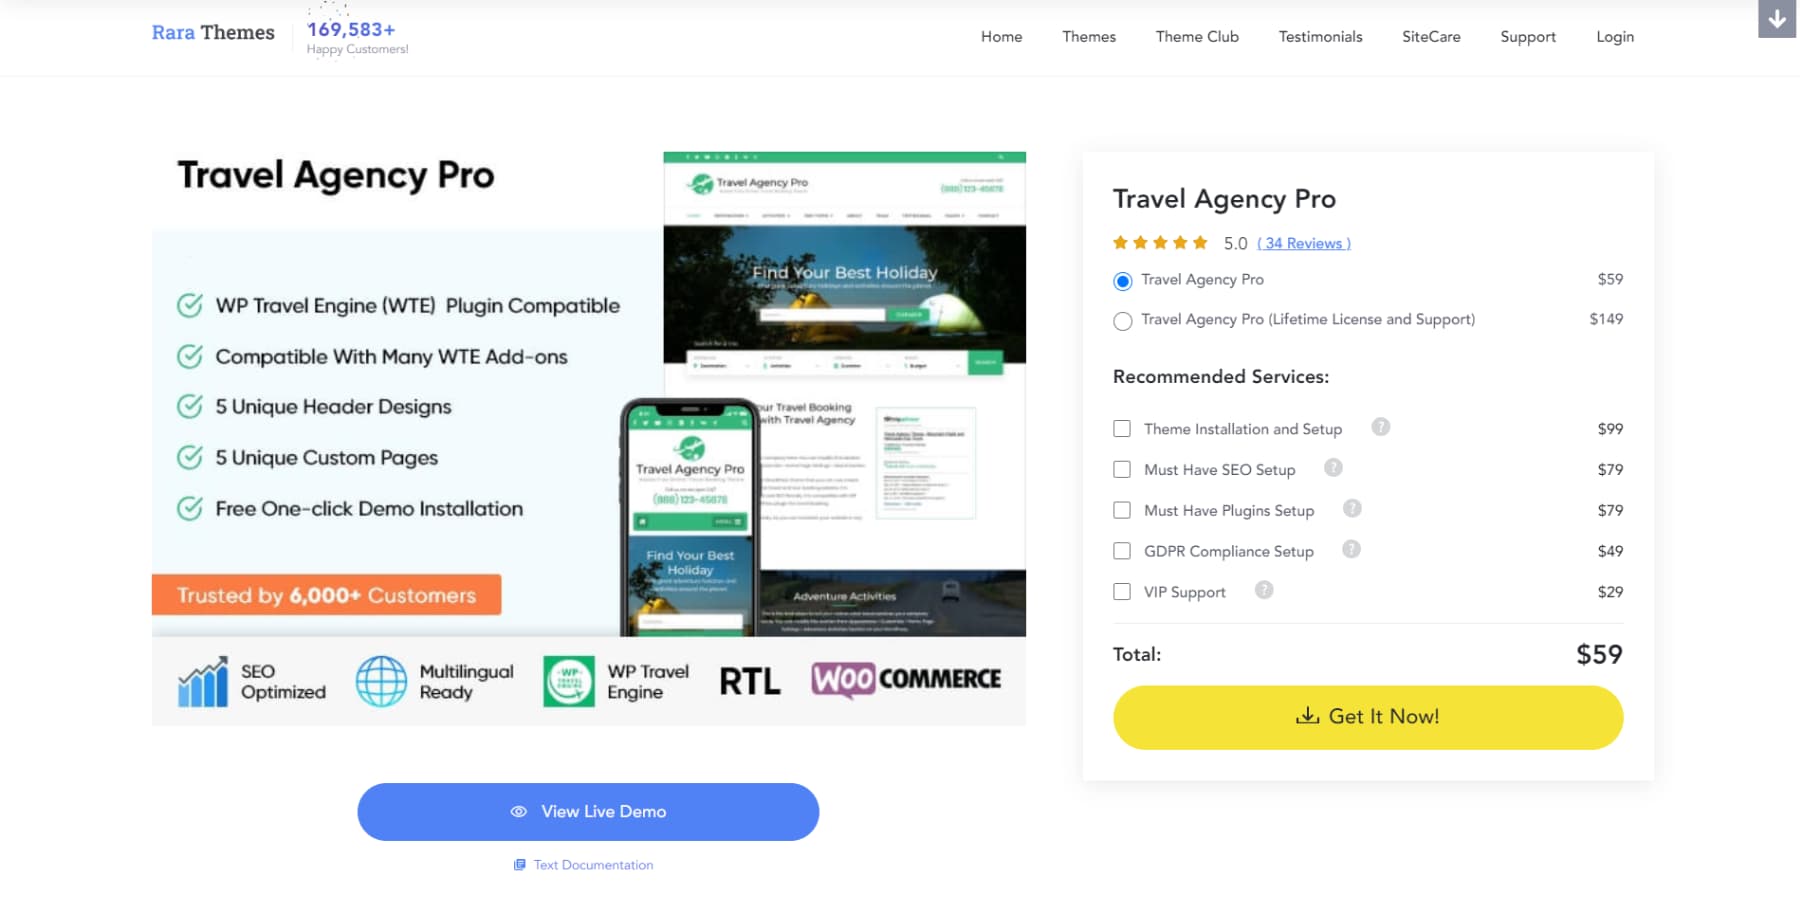 A screenshot of Travel Agency Pro's home page